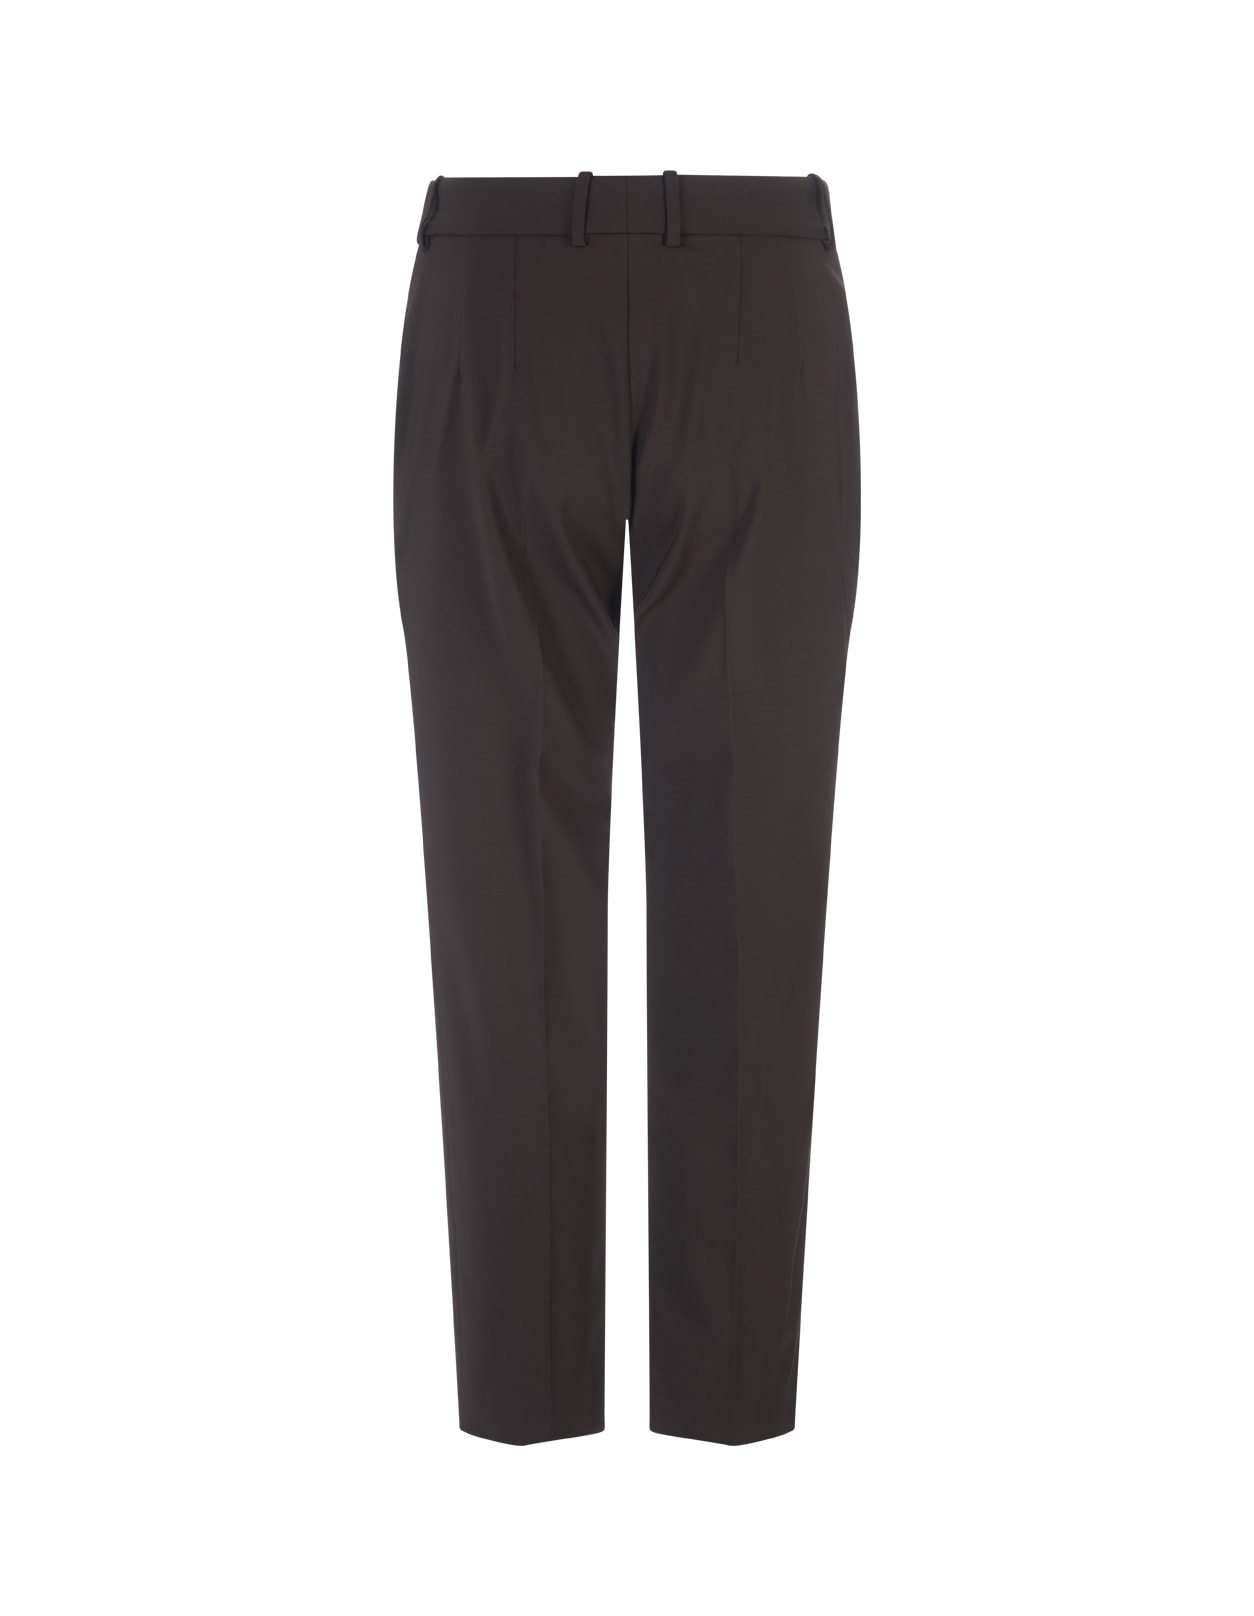 Ermanno Scervino Brown Classic High Waist Trousers